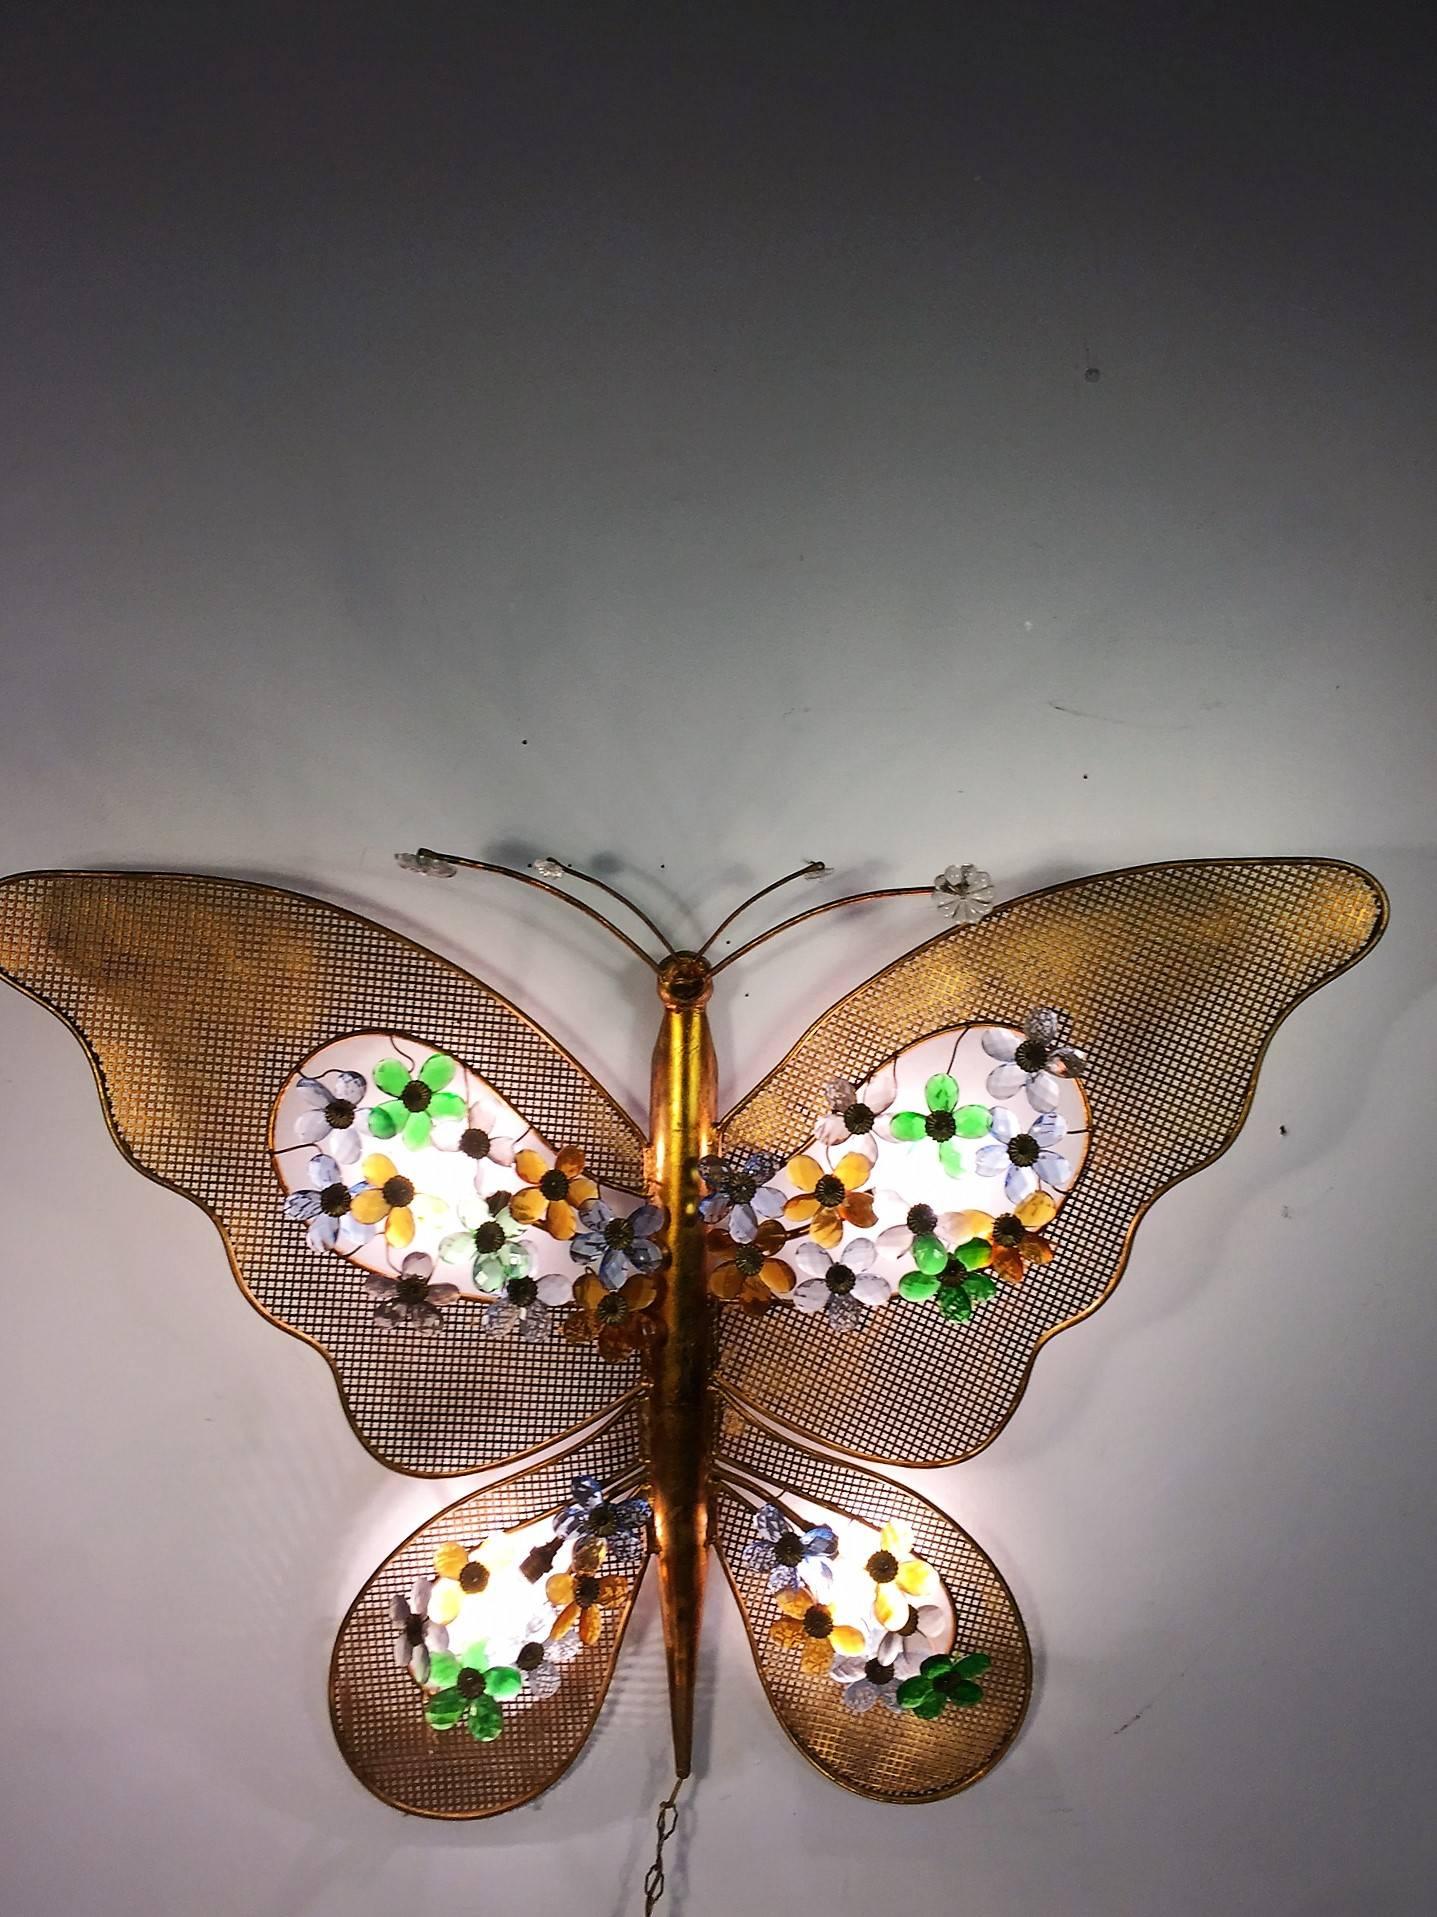 Amazing gilded Italian butterfly with the wings encrusted with colorful crystal flowers above the light sockets. Designed of gilded decorative metal the antennae have colorful crystal flowers and clear crystal accents. Designed with recessed eyes